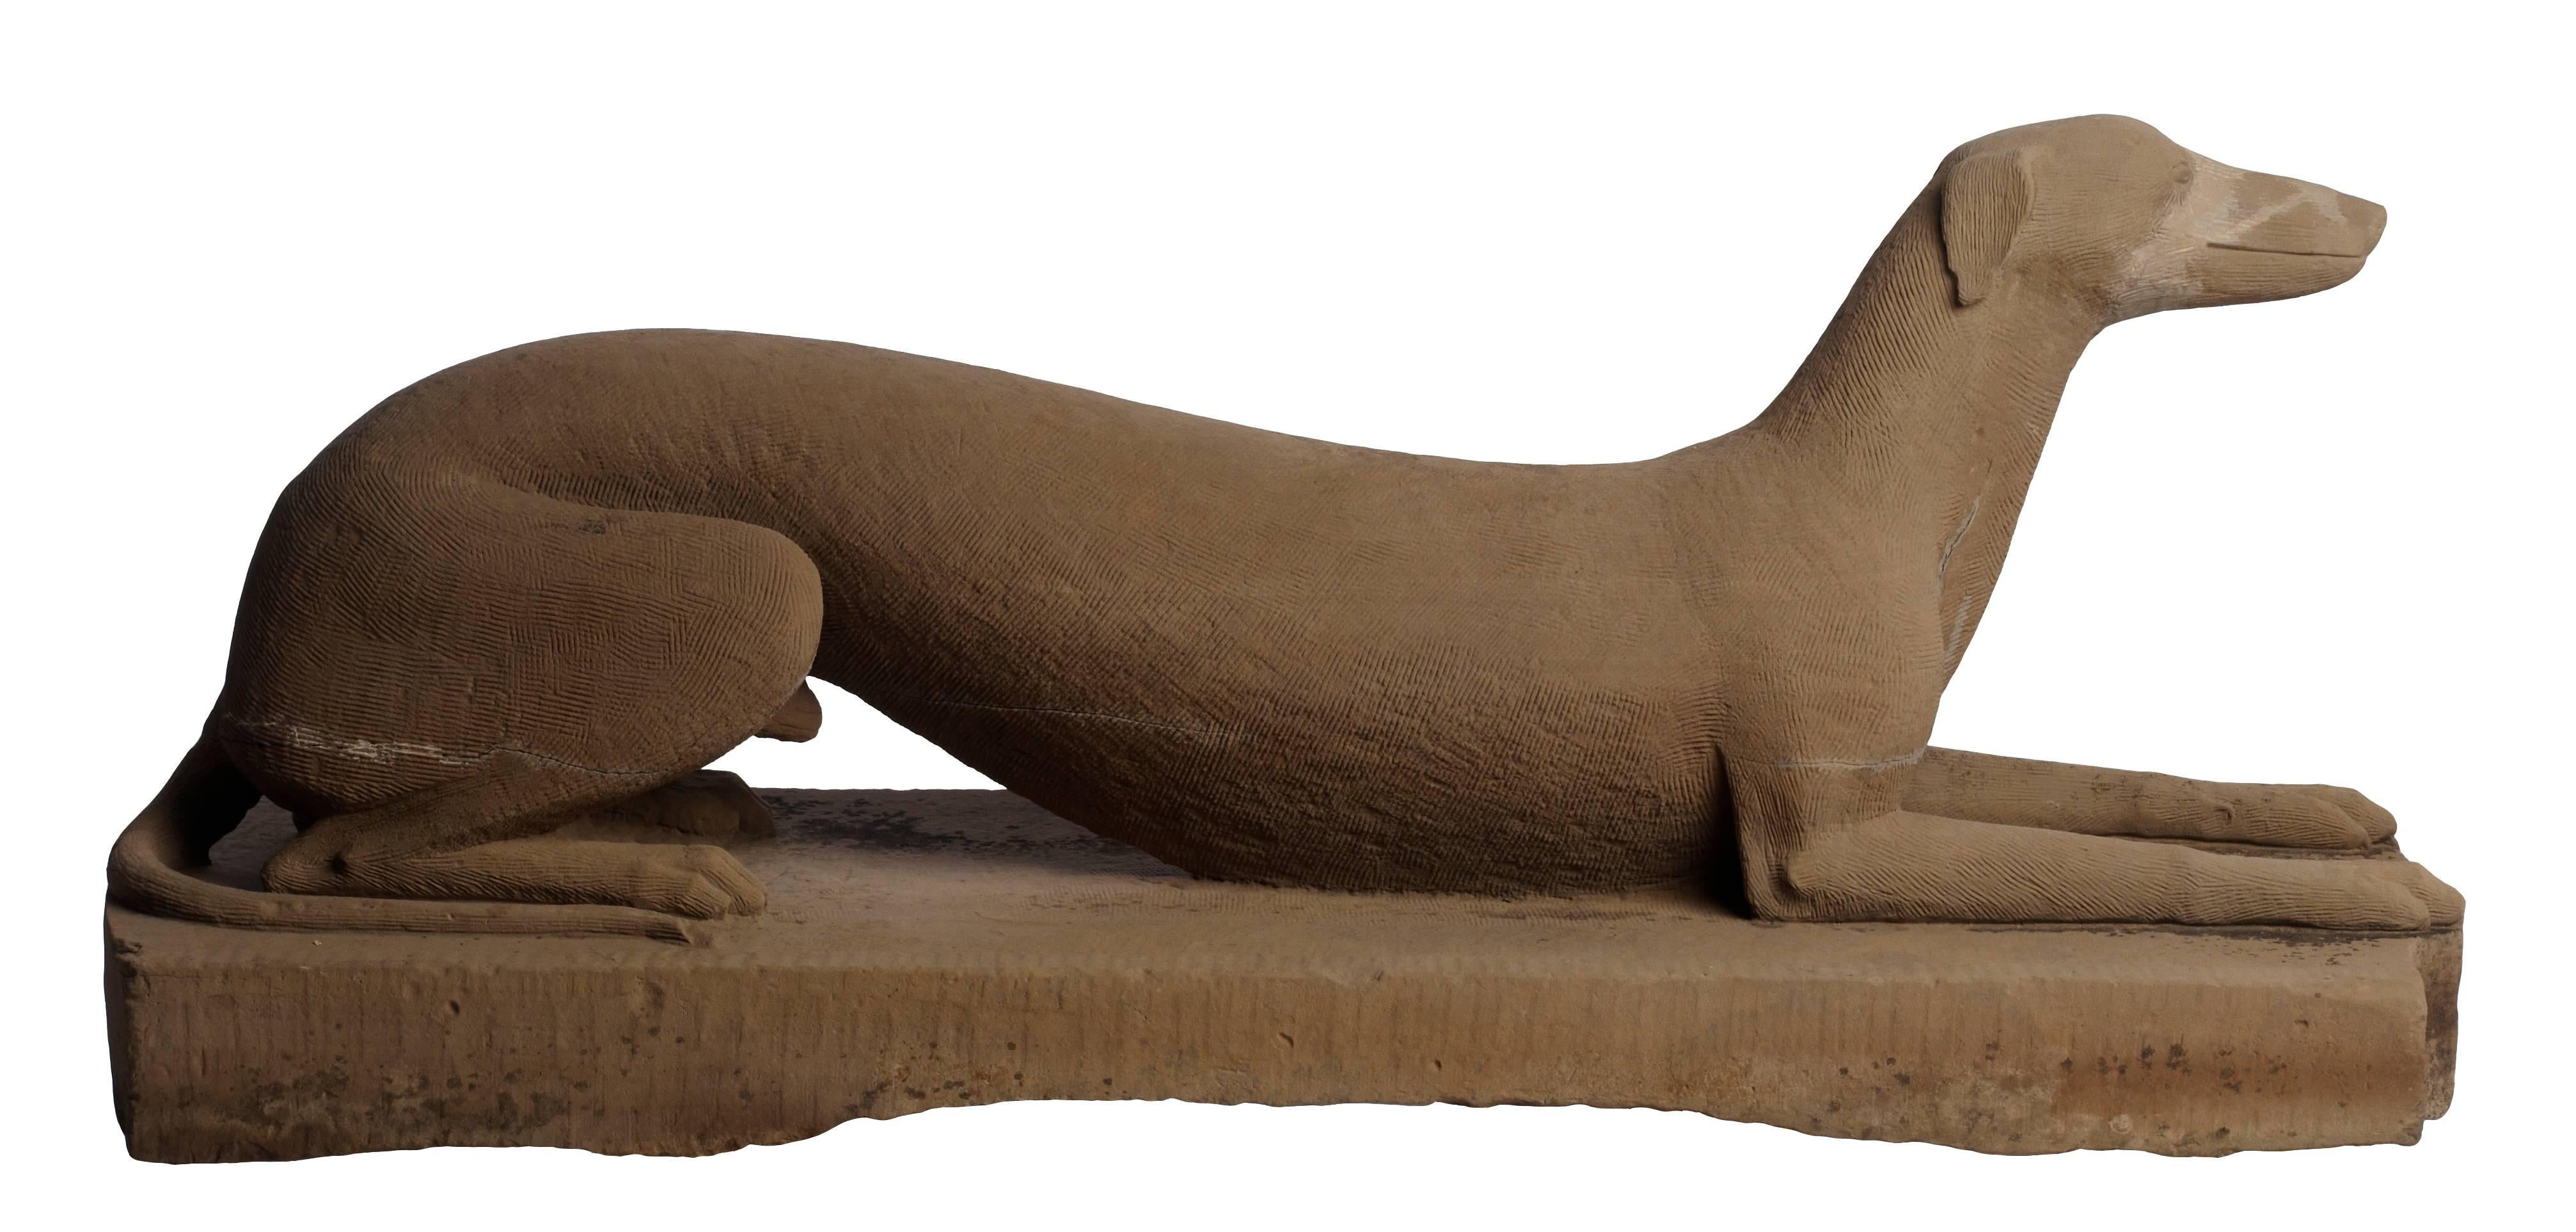 Sleek portrait of a Greyhound carved from sandstone in the mid-19th century. Descended in the Farmer family of Portsmouth, Ohio and believed to have been carved by an ancestor who arrived there from Virginia in the mid- 19th century. Originally